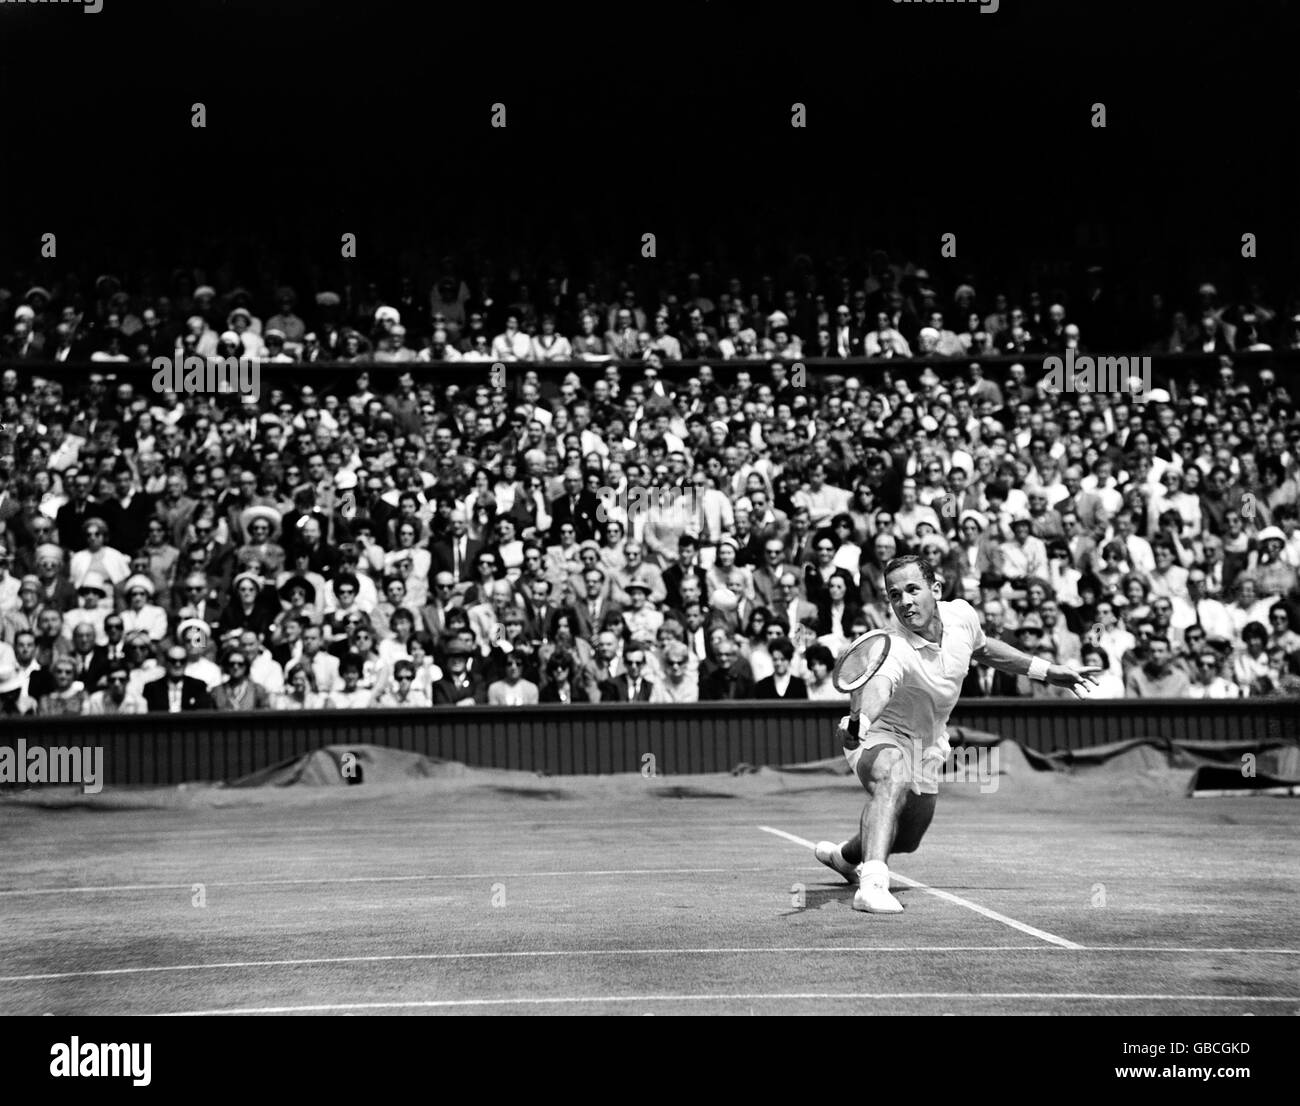 Tennis - Wimbledon Championships - Men's Singles - Final - Chuck McKinley v Fred Stolle. Chuck McKinley stretches to return the ball Stock Photo